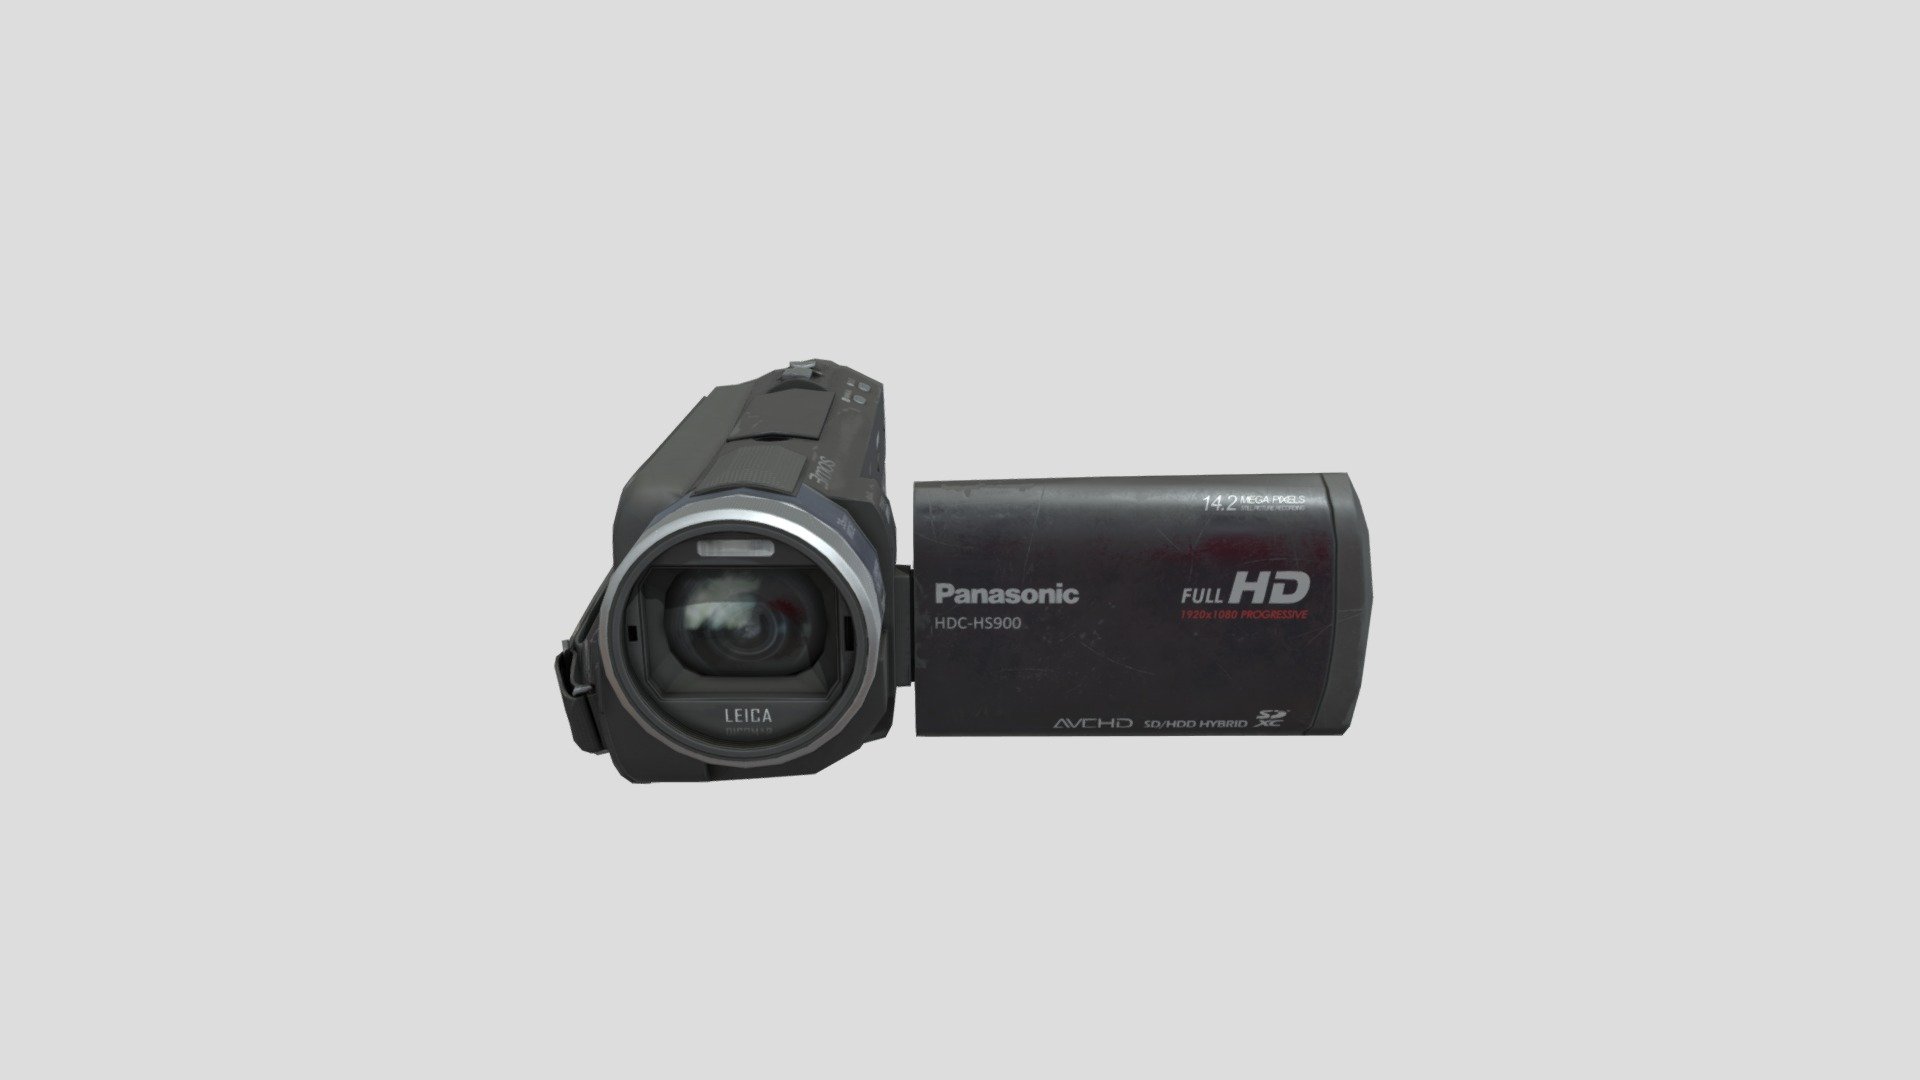 Video camera Panasonic HDC-HS900. It is the camera of a nerd and investigator of paranormal events. It has a realistic style and use wear.

You can see more details here - Video Camera - 3D model by Edwin Huerta (@edwinhuerta) 3d model